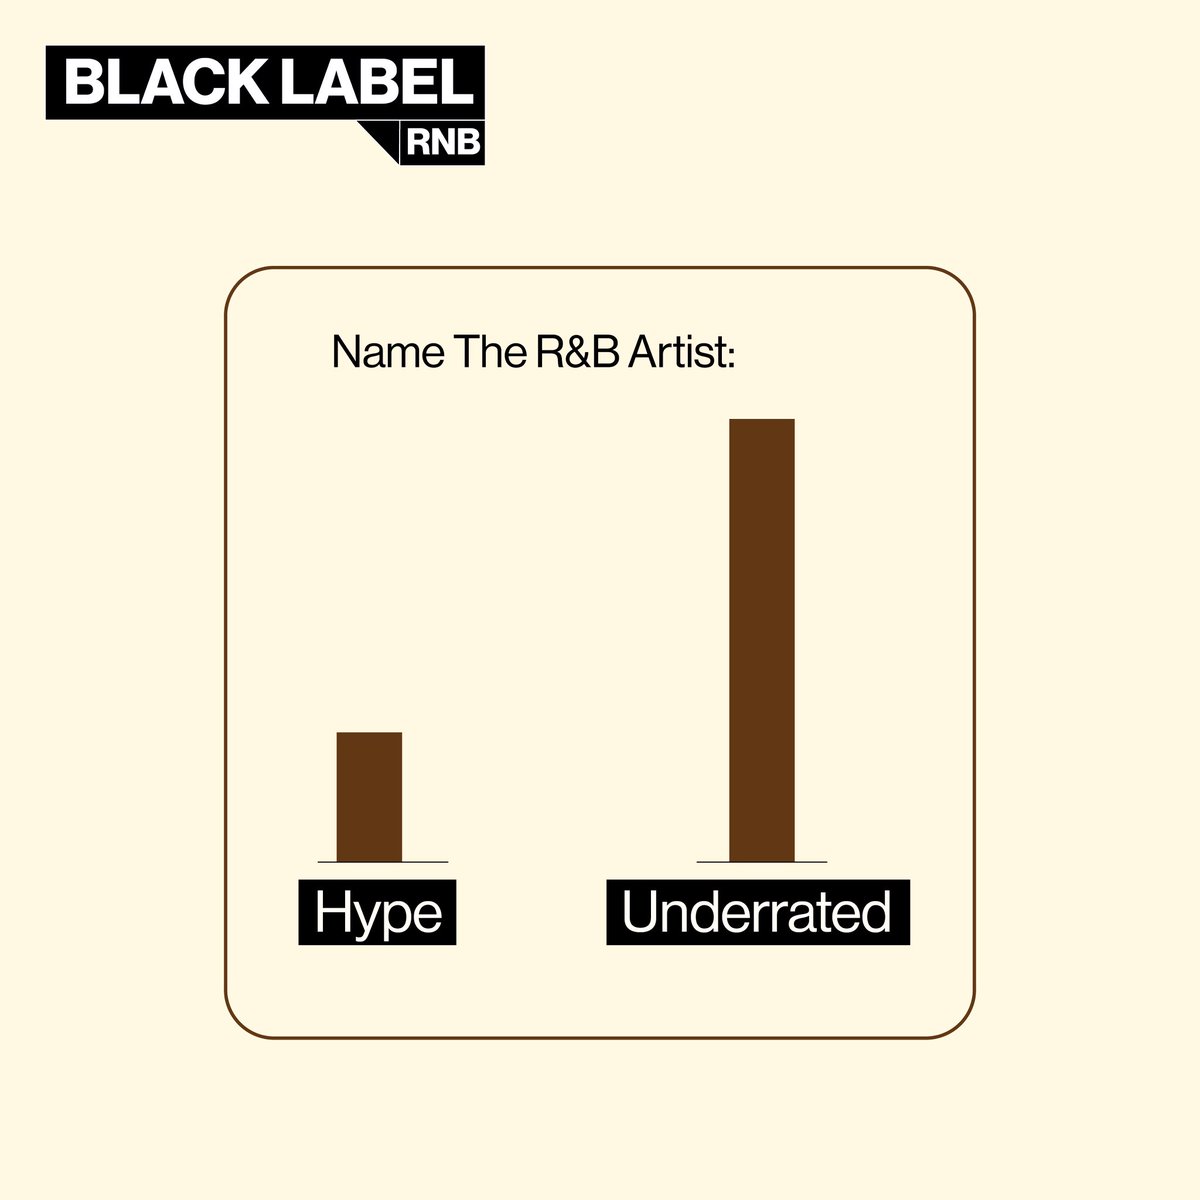 comment below an underrated artist R&B artist you want to see more of ⬇️

#underratedrnb #underratedmusic #shreta #musicdiscovery #rnblovers #rnbmusiclovers #rnbjunkie #rnblover #rnblove #realrnb #rnbvibes #rnbhits